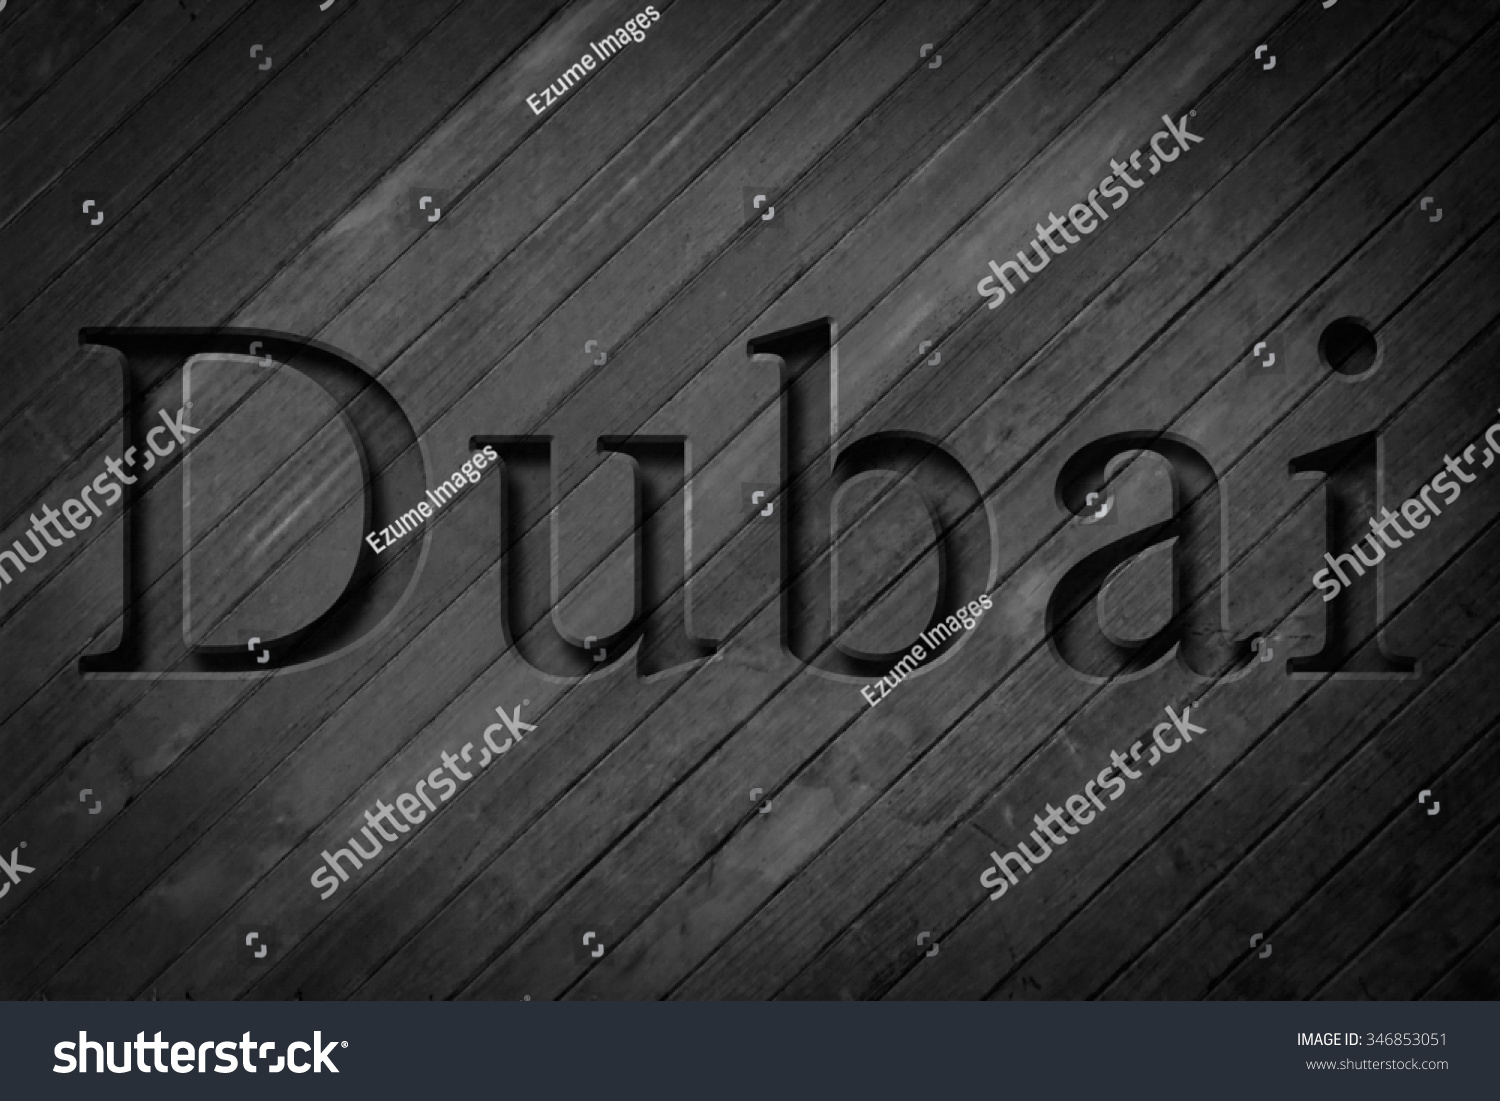 Engraving spelling the city Dubai on textured old surface #346853051